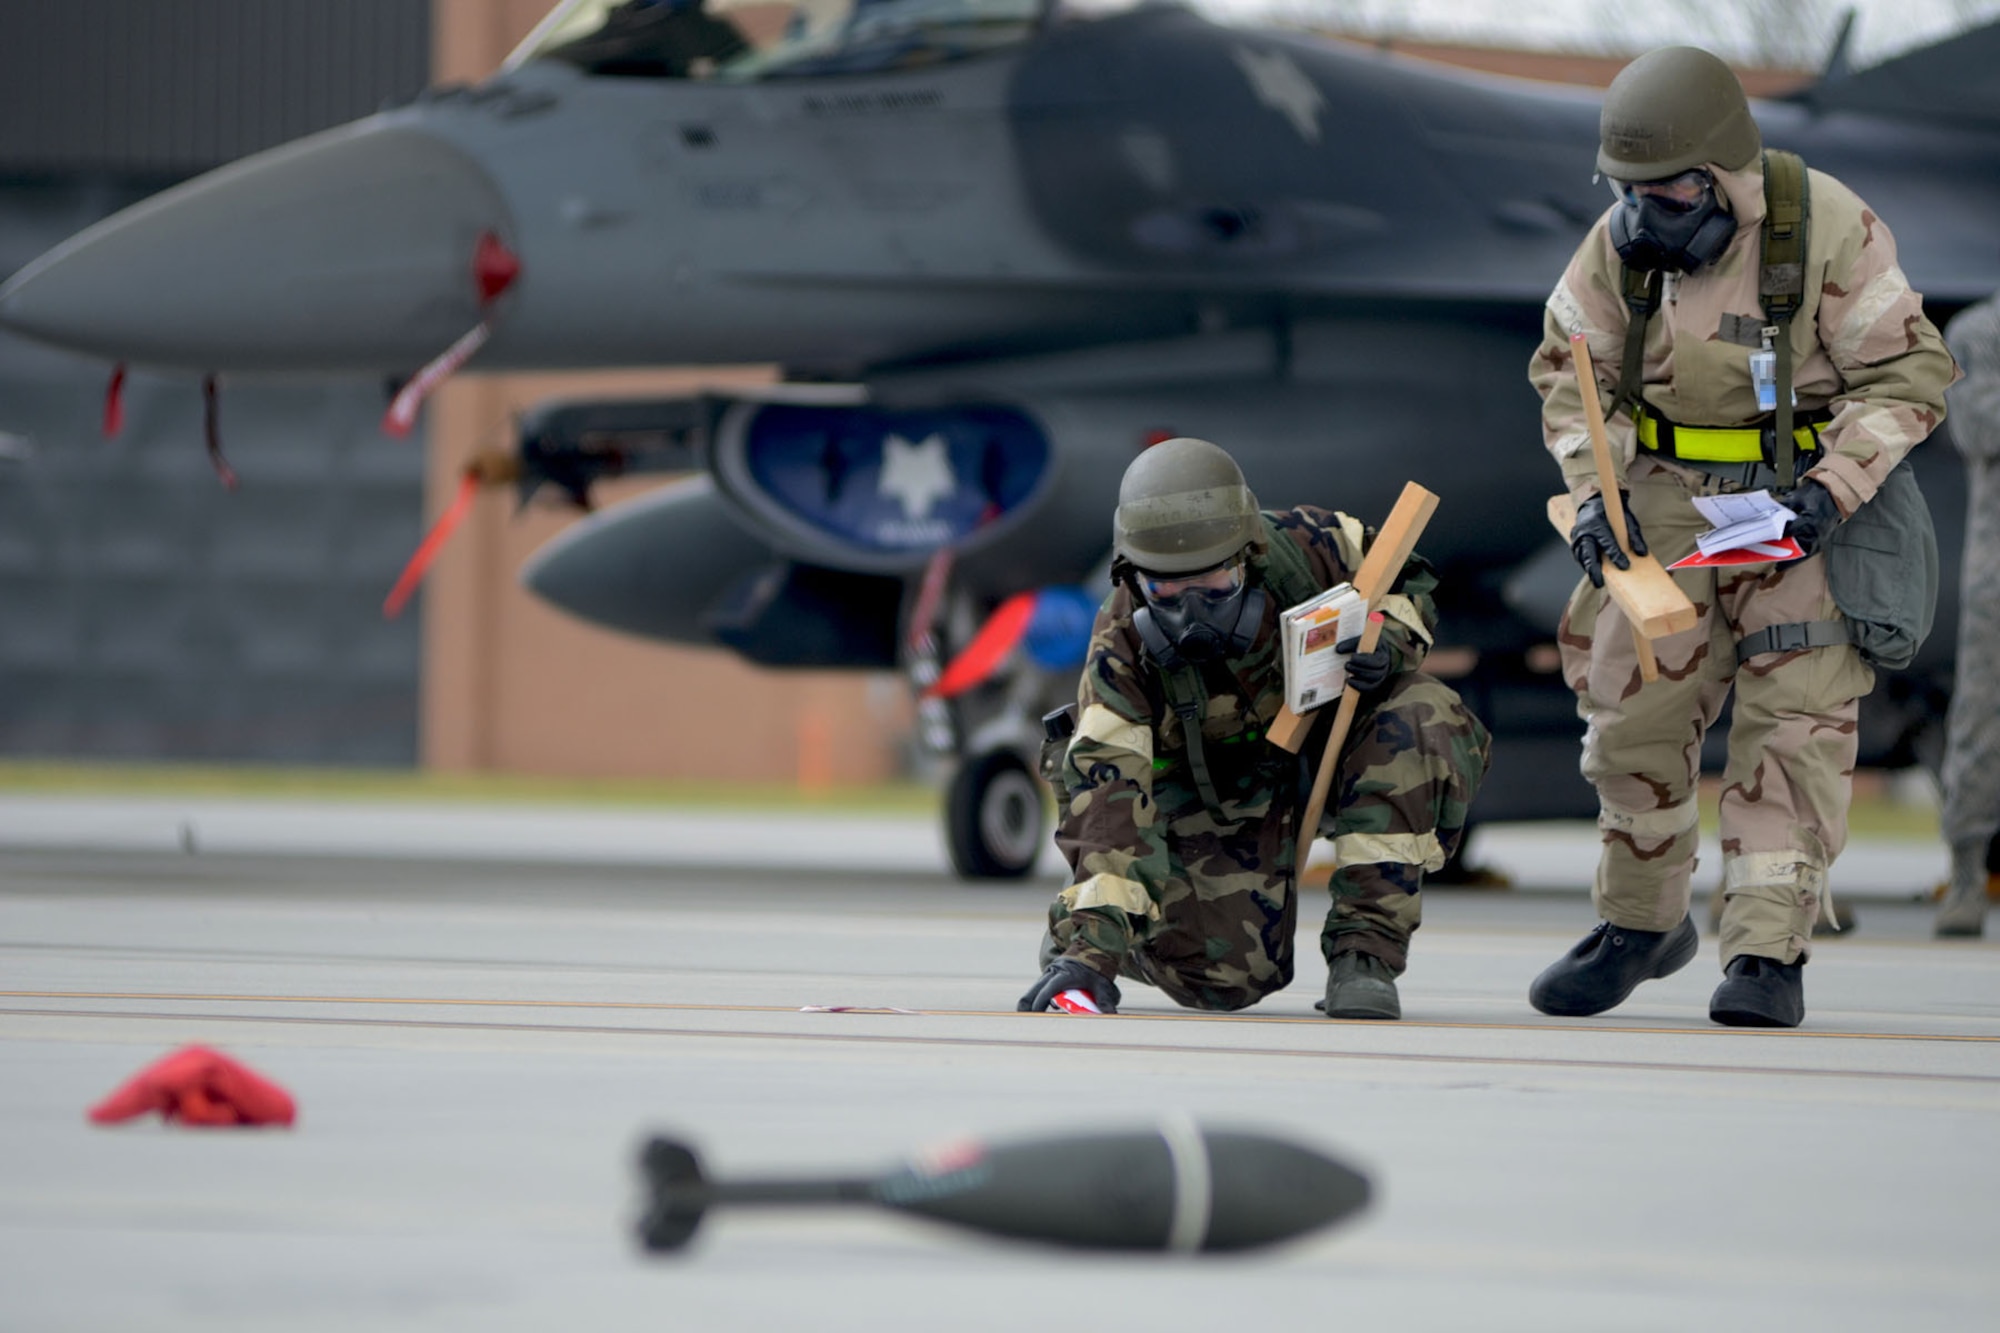 U.S. Air Force Airmen, assigned to a Post Attack Reconnaissance team for the 169th Fighter Wing at McEntire Joint National Guard Base, S.C., conduct PAR checks after a simulated chemical attack on the flight line during a Phase II Readiness Exercise, April 12, 2013. Members of the 169th Fighter Wing are preparing for a Phase I and II Readiness Inspection, which evaluates a unit's ability to deploy, then operate and launch missions in a chemical combat environment.  
(U.S. Air National Guard photo by Tech. Sgt. Caycee Watson/Released)